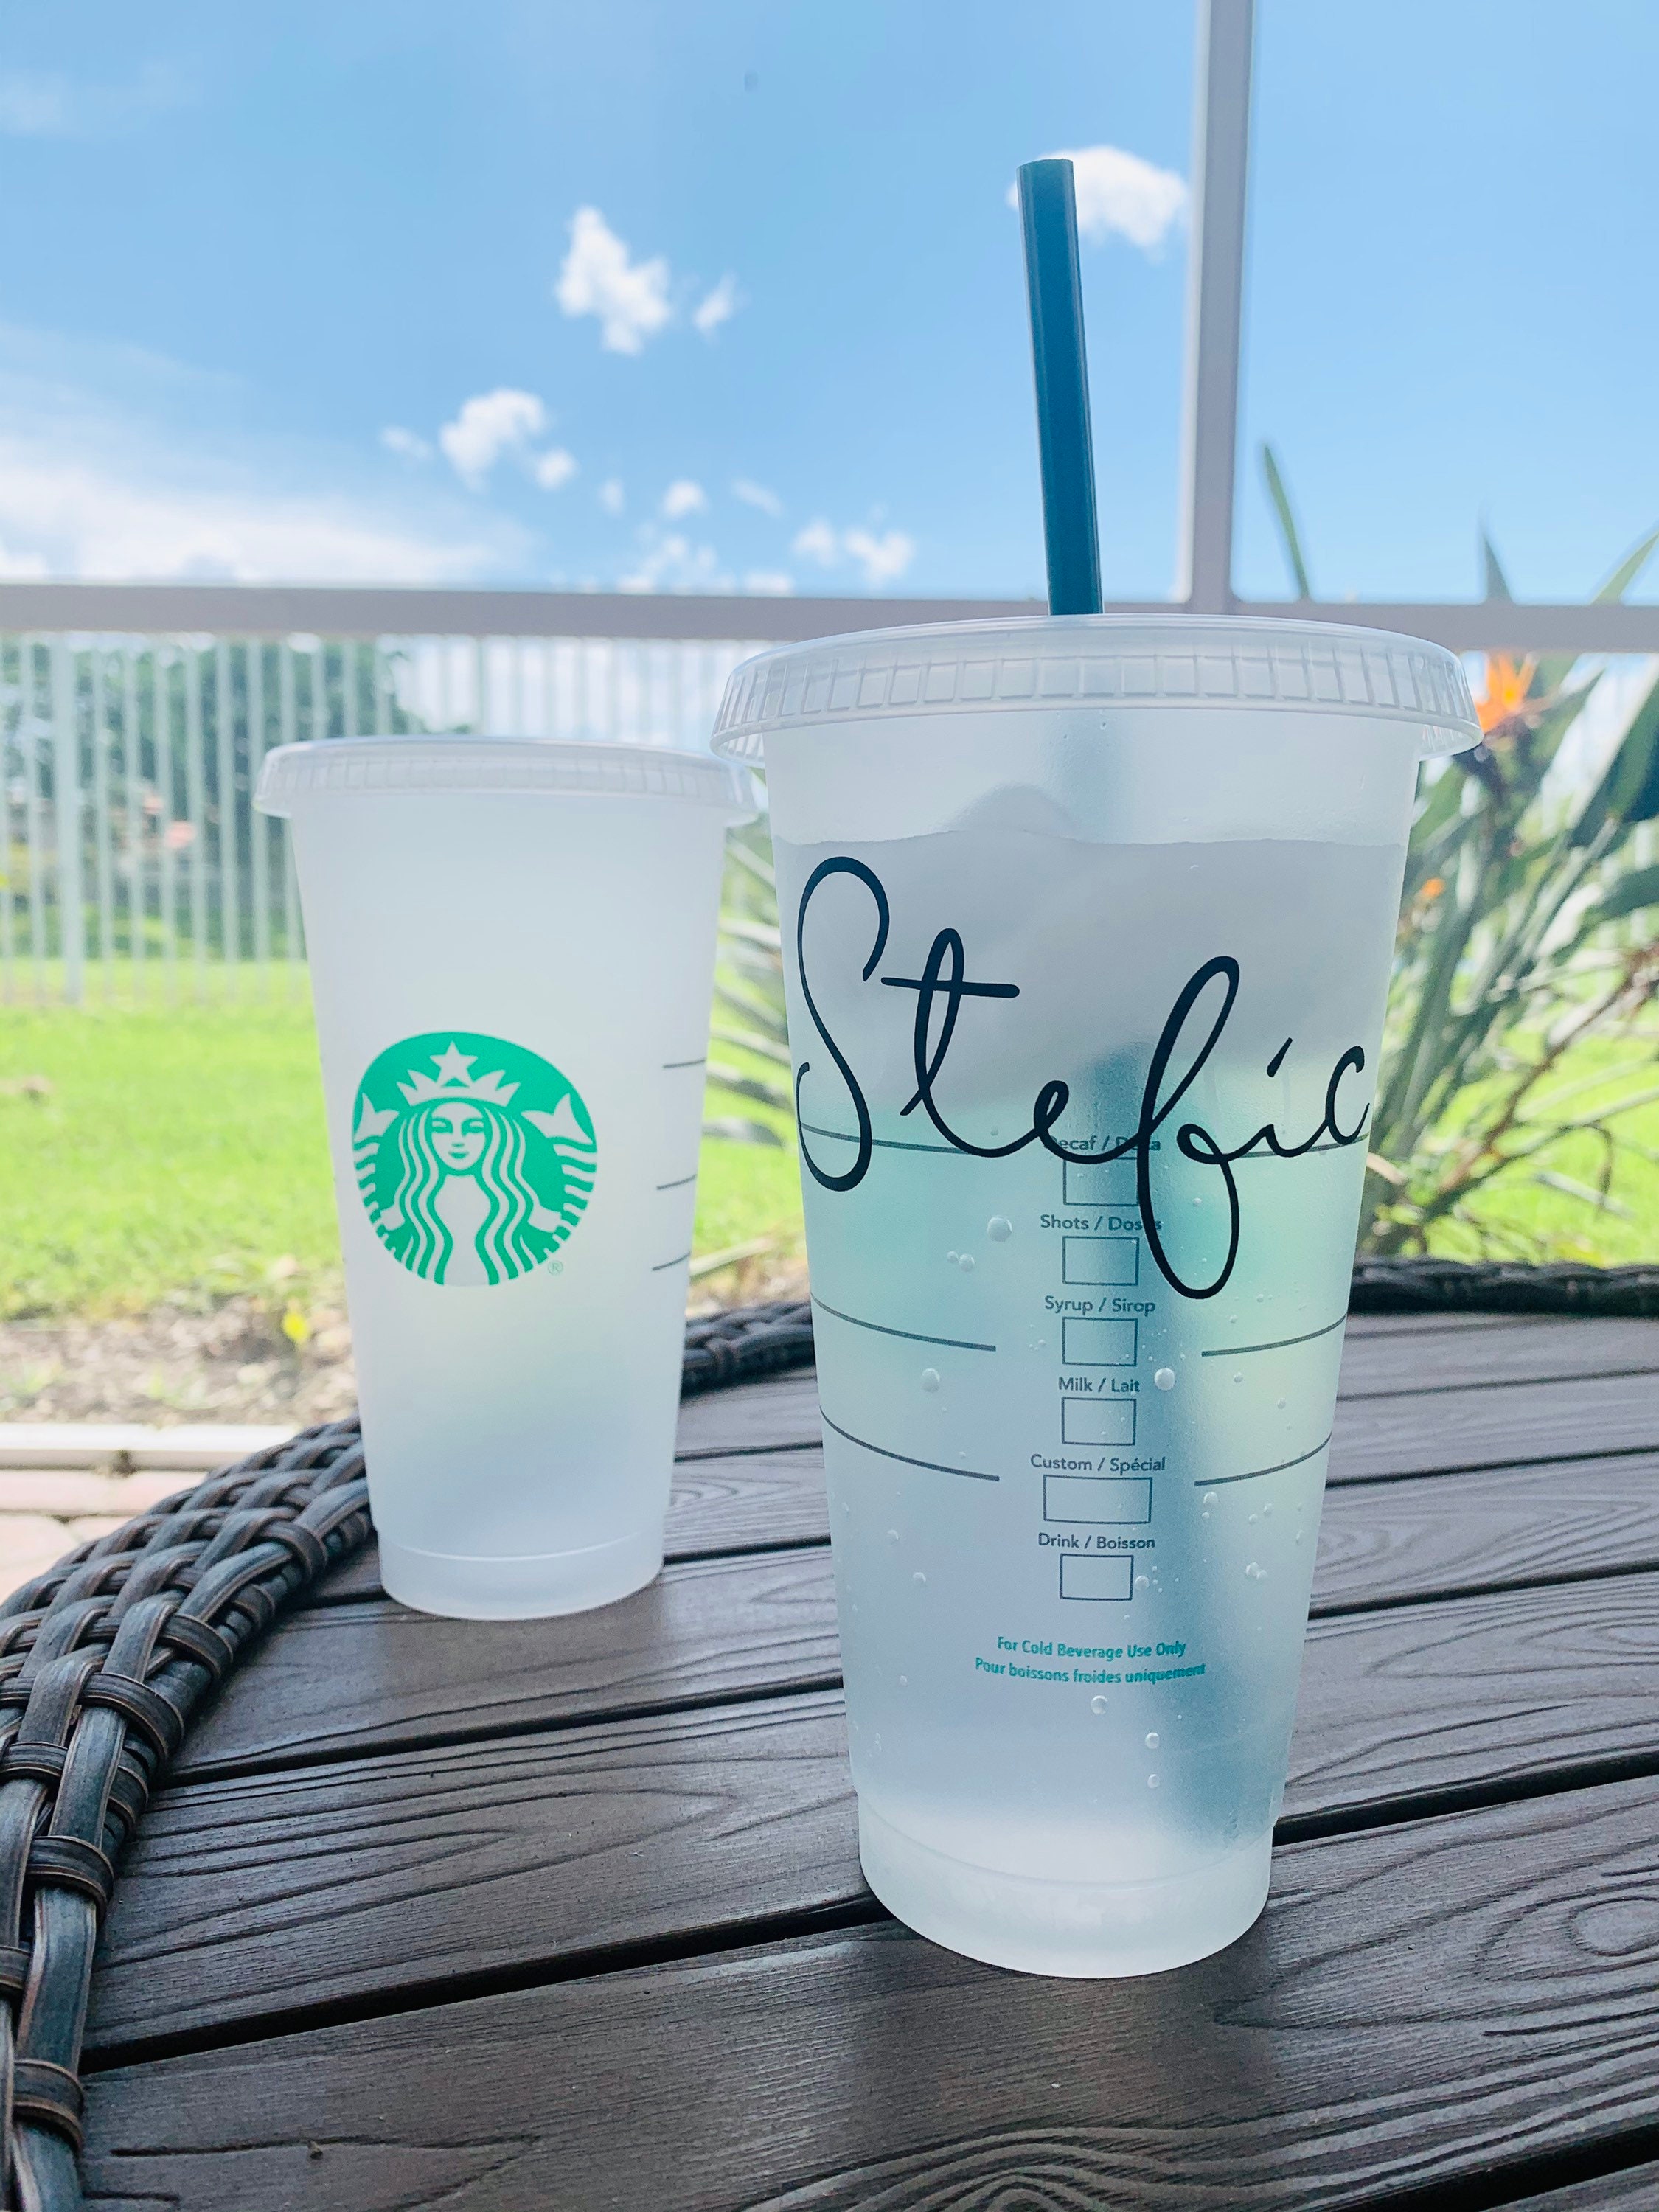 Starbucks 32 oz Cold Drink Clear Cups ~ Case of 300 ct. ~ J1669249